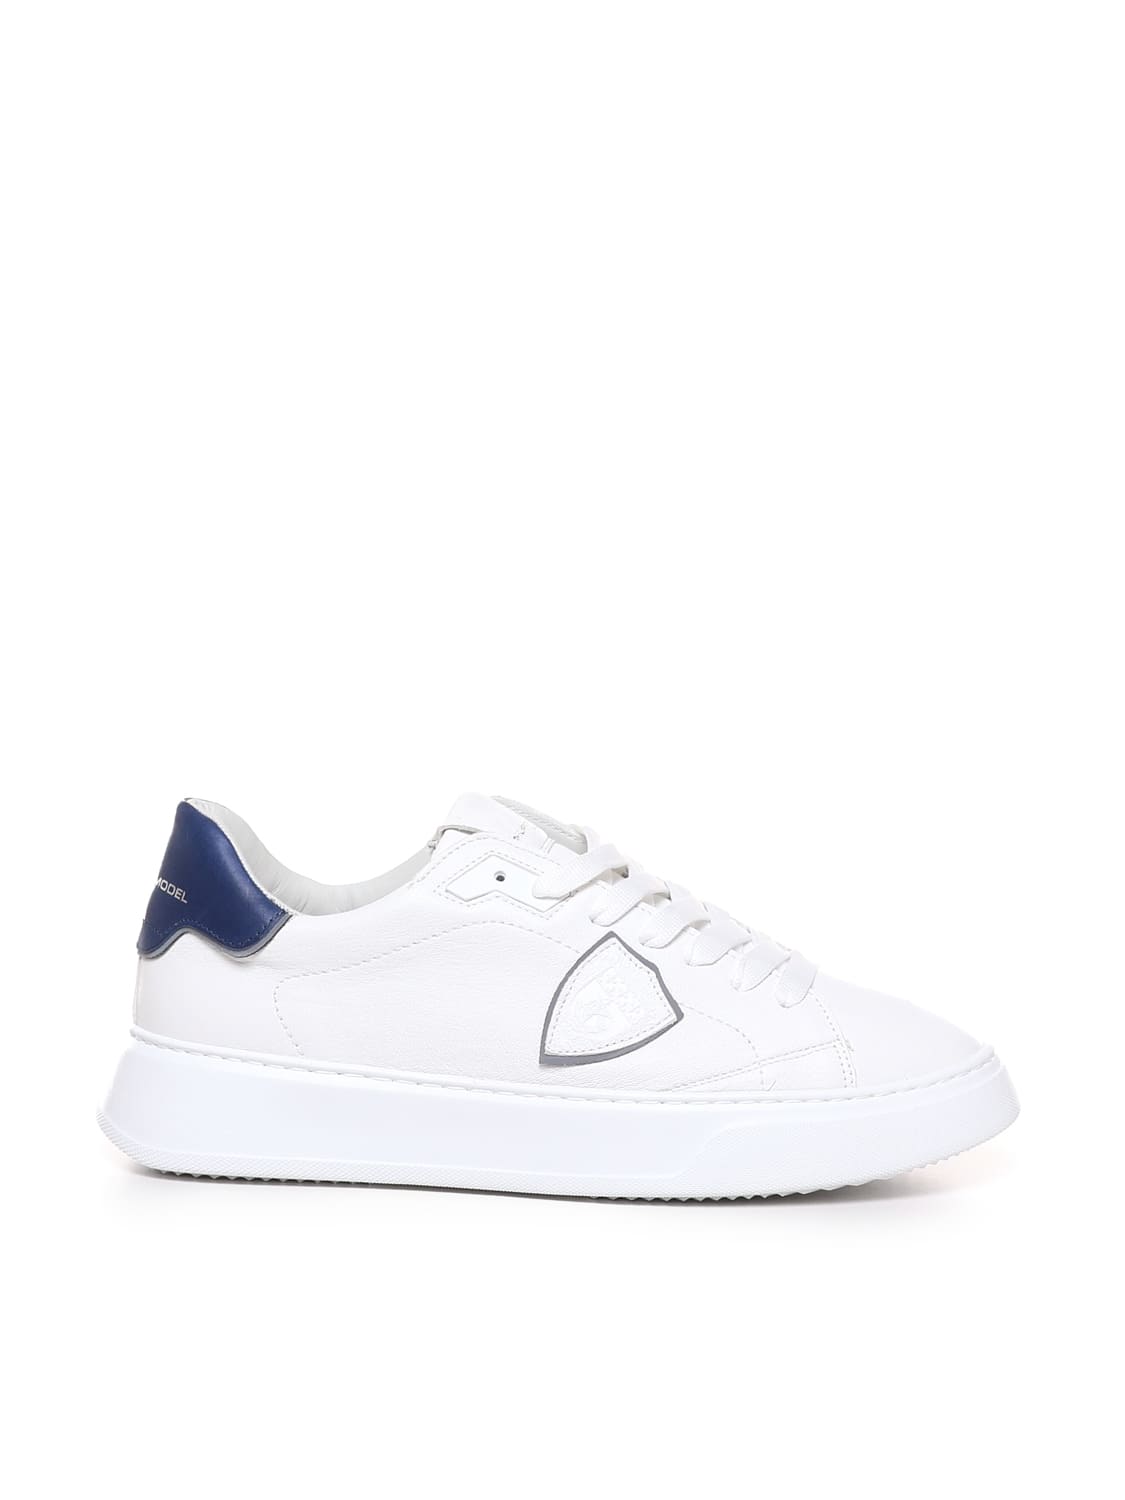 Philippe Model Paris Leather Sneakers In White, Blue